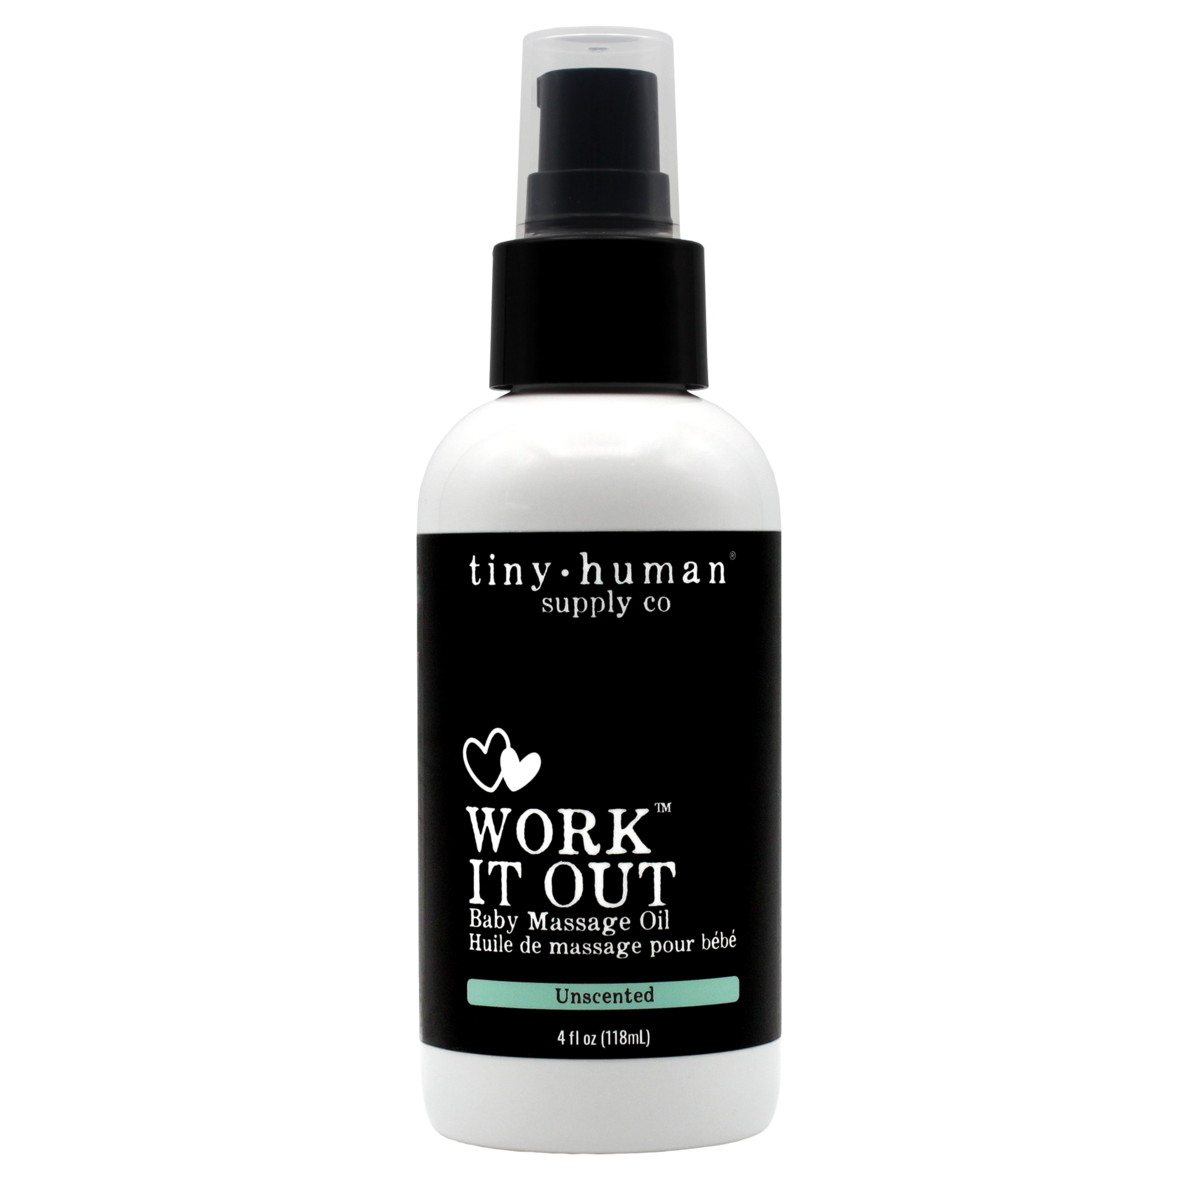 Work It Out, Baby Massage Oil by Tiny Human Supply Co